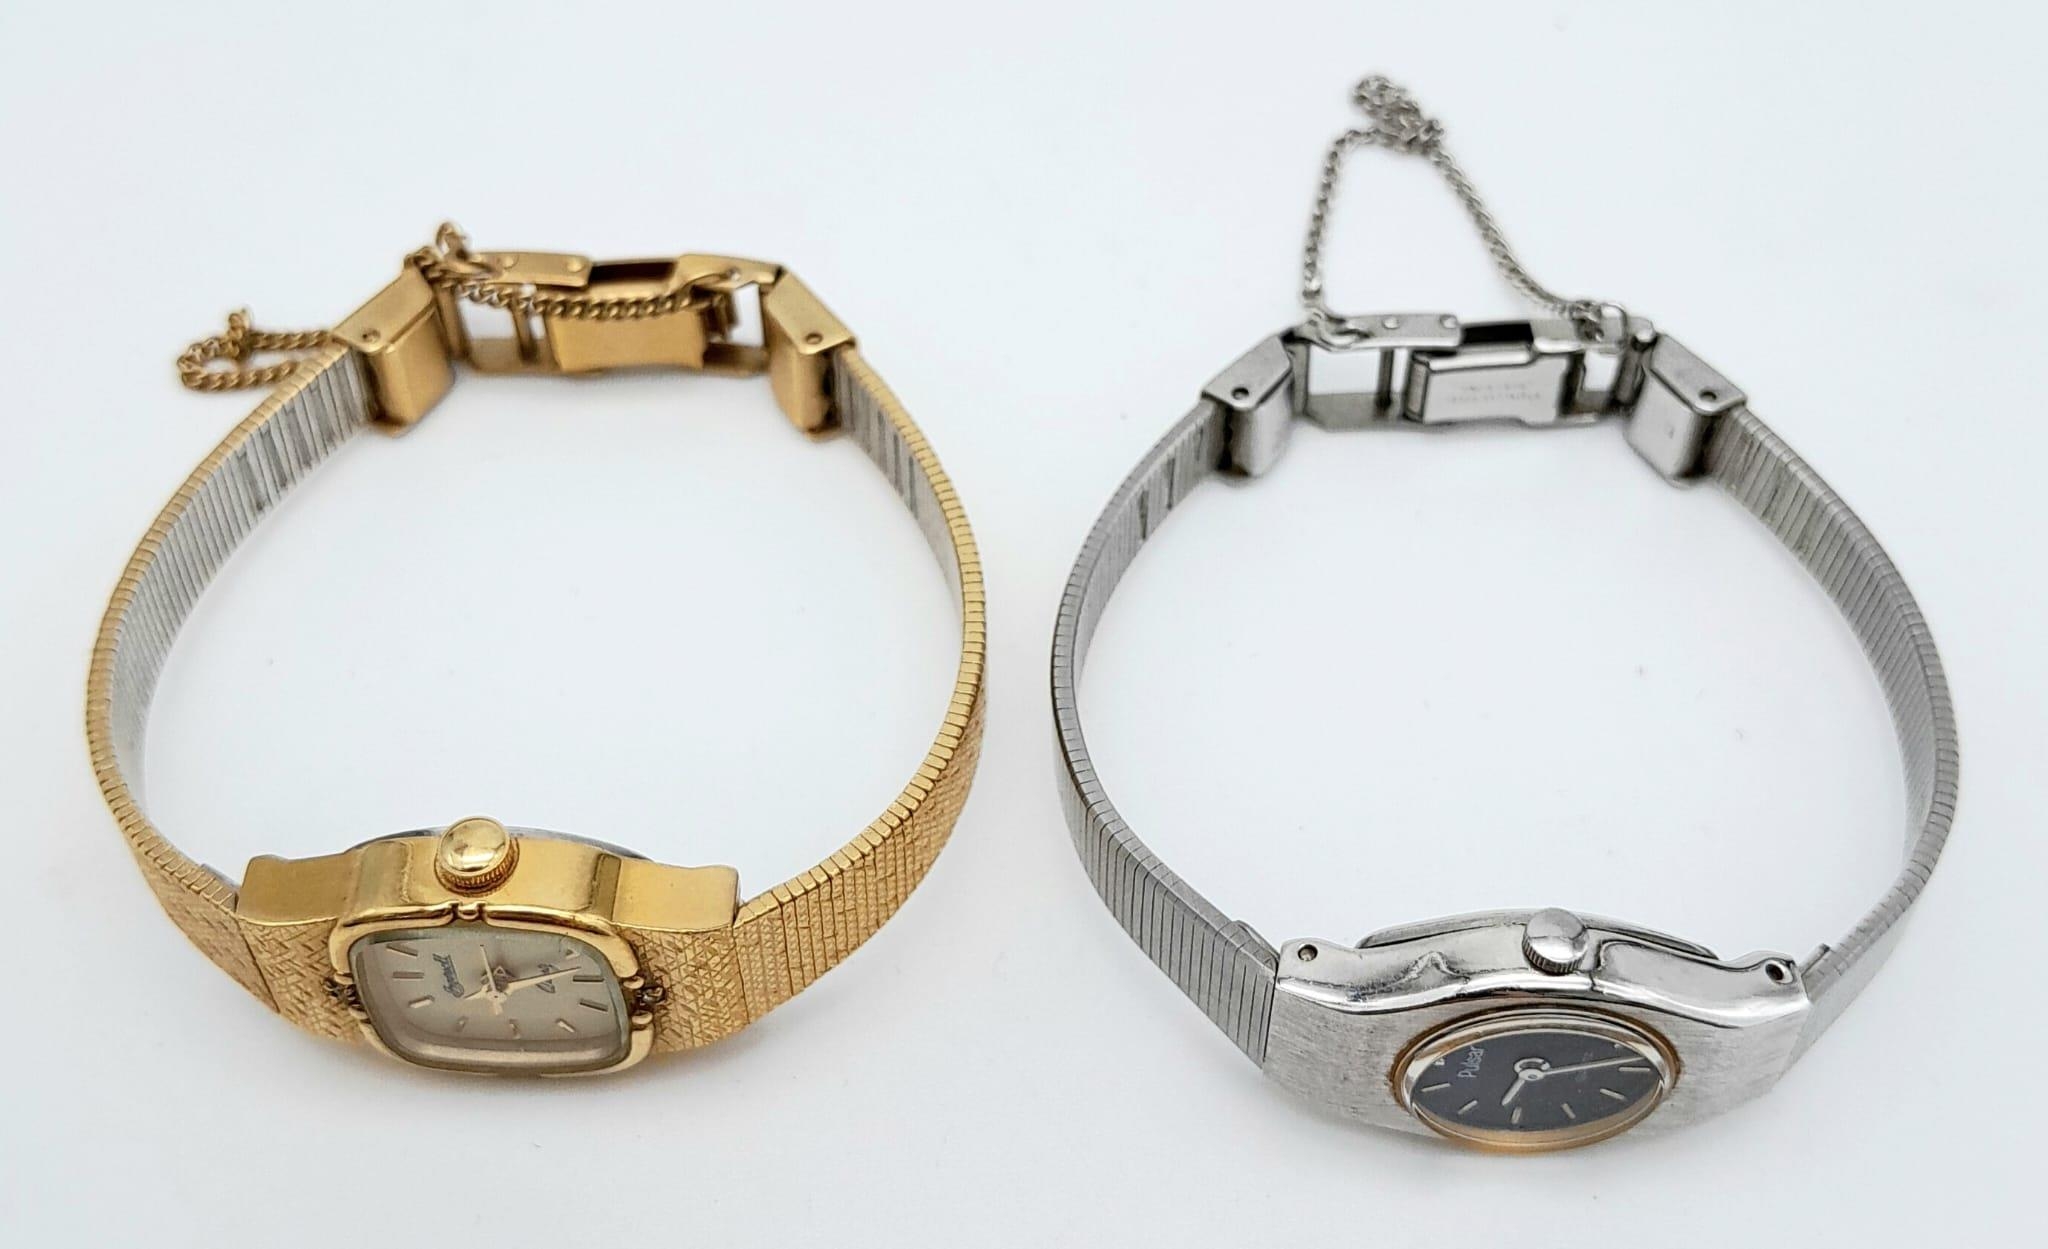 Two Ladies Dress/Cocktail Watches, Comprising 1) A Silver and Gold Tone Pulsar Quartz Watch (16mm